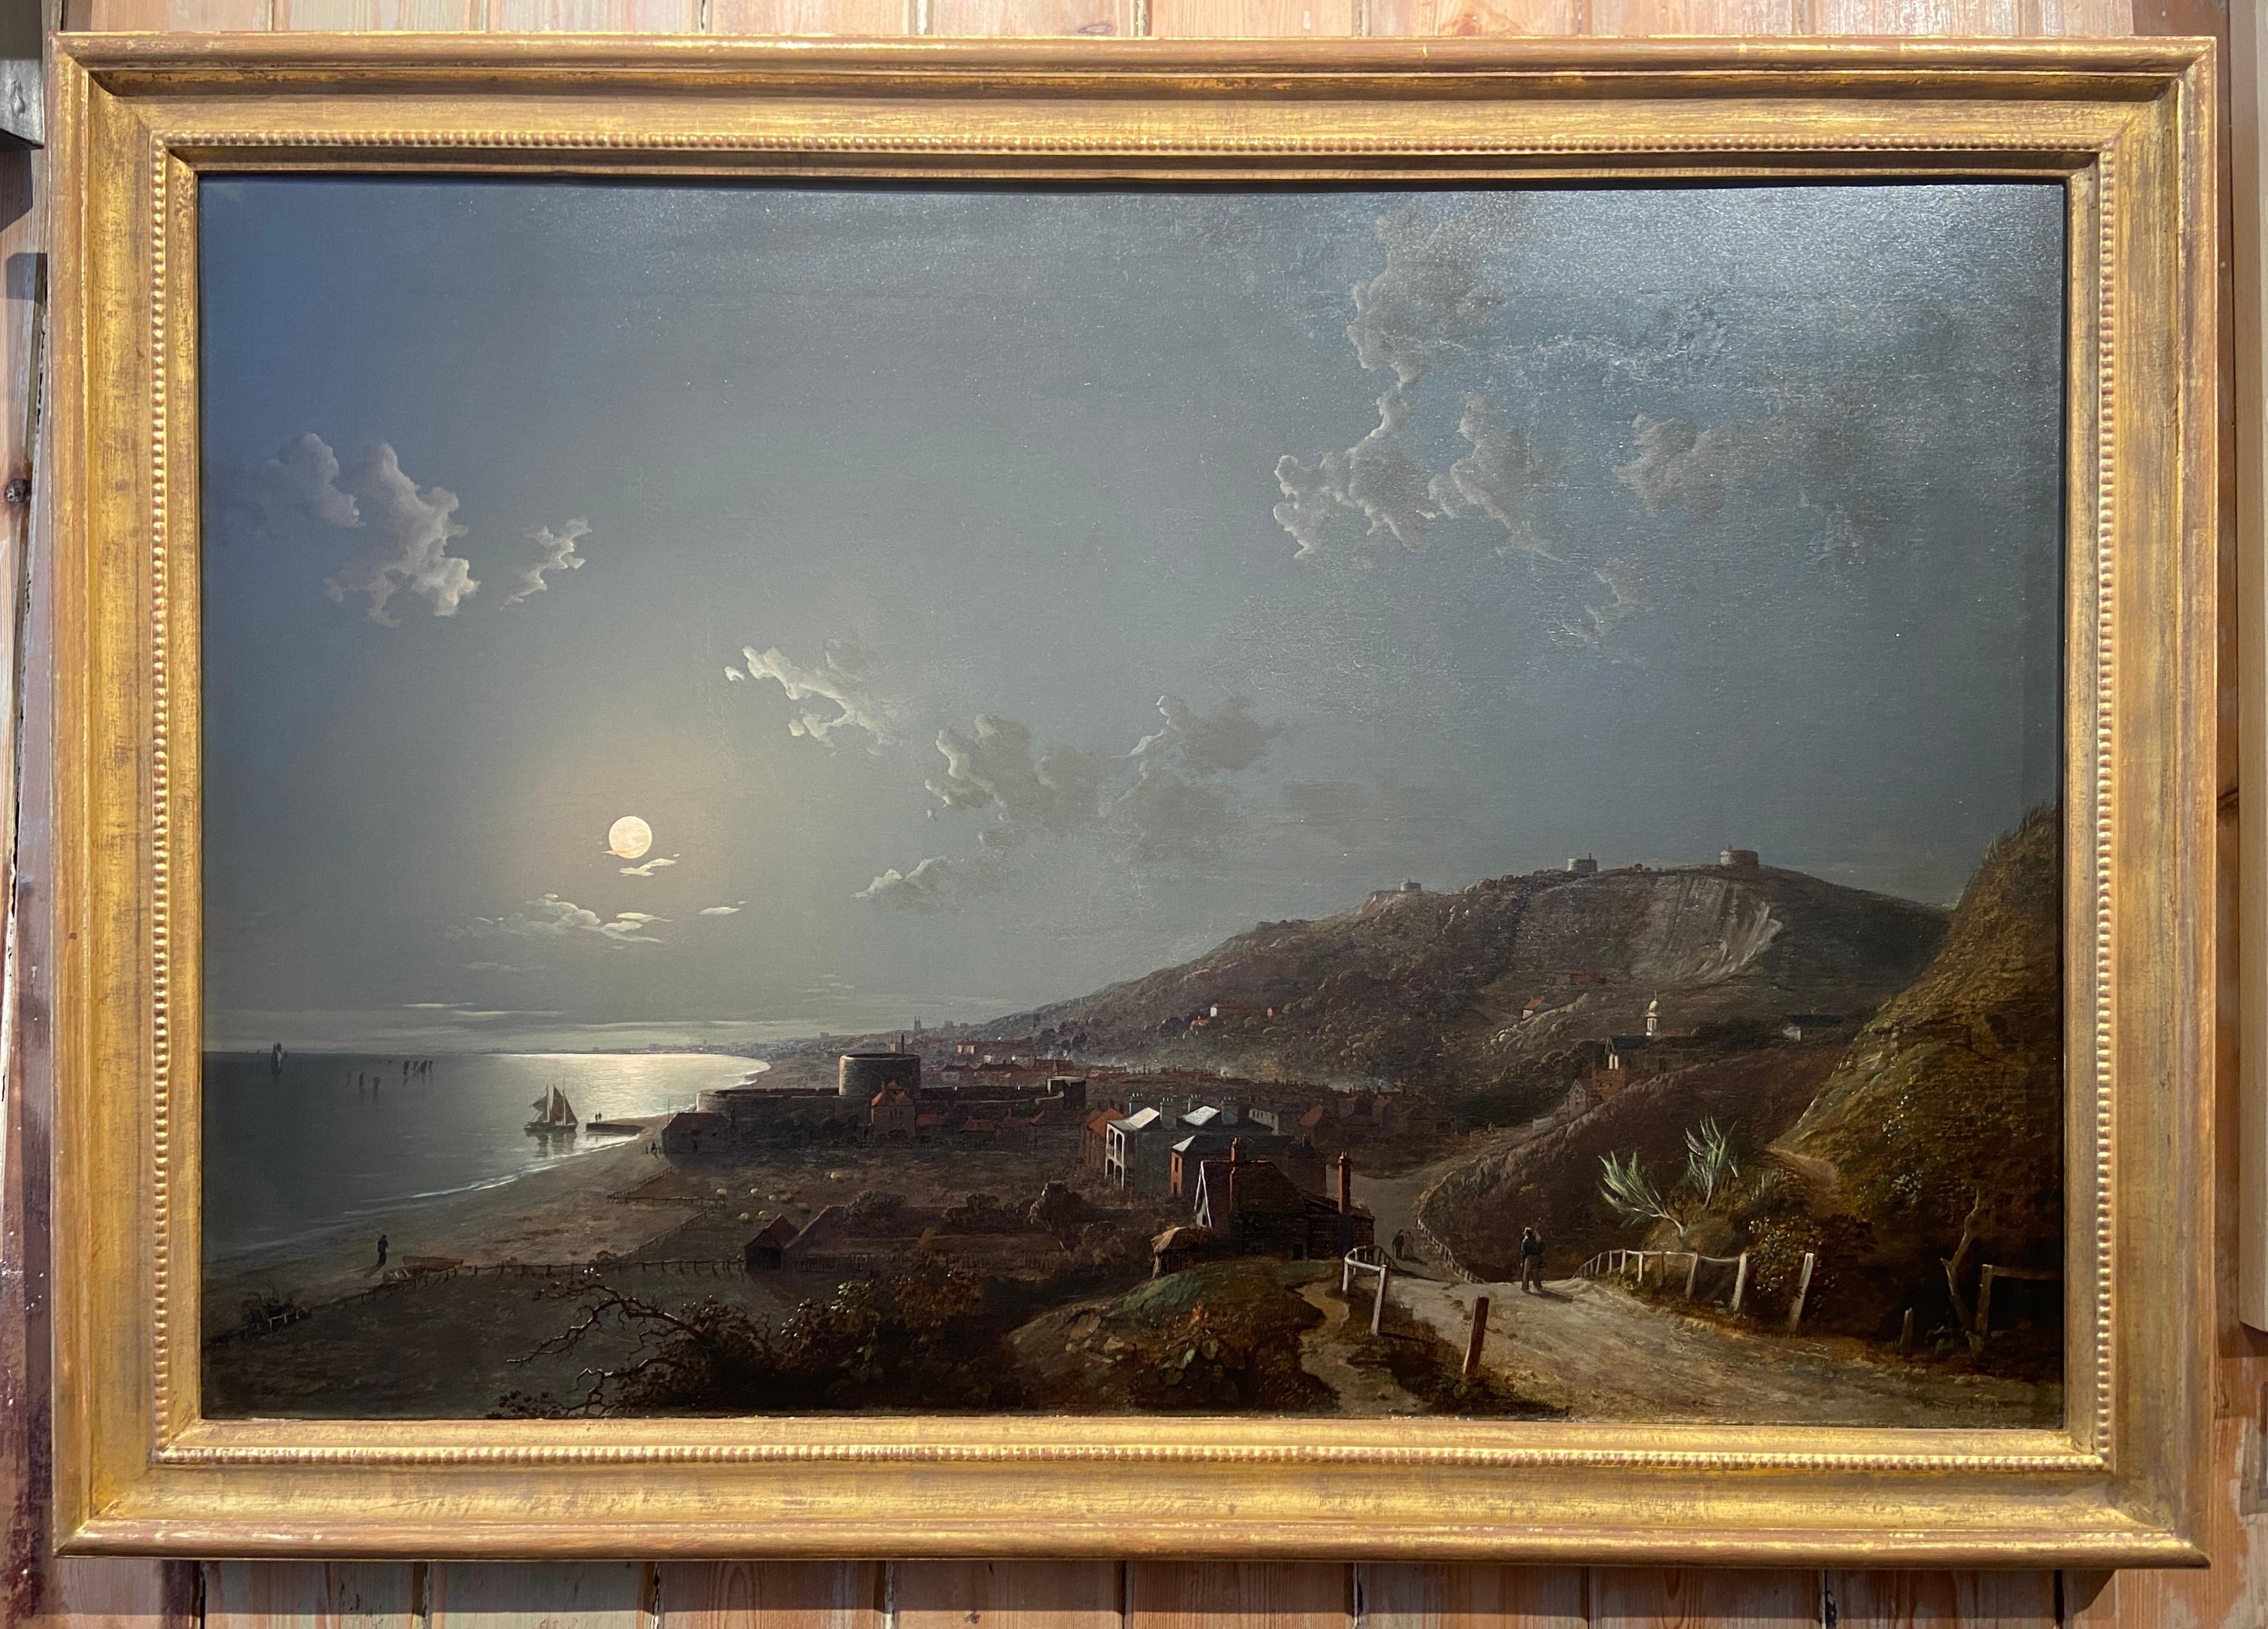 Sandgate Castle by Moonlight - Painting by Henry Pether